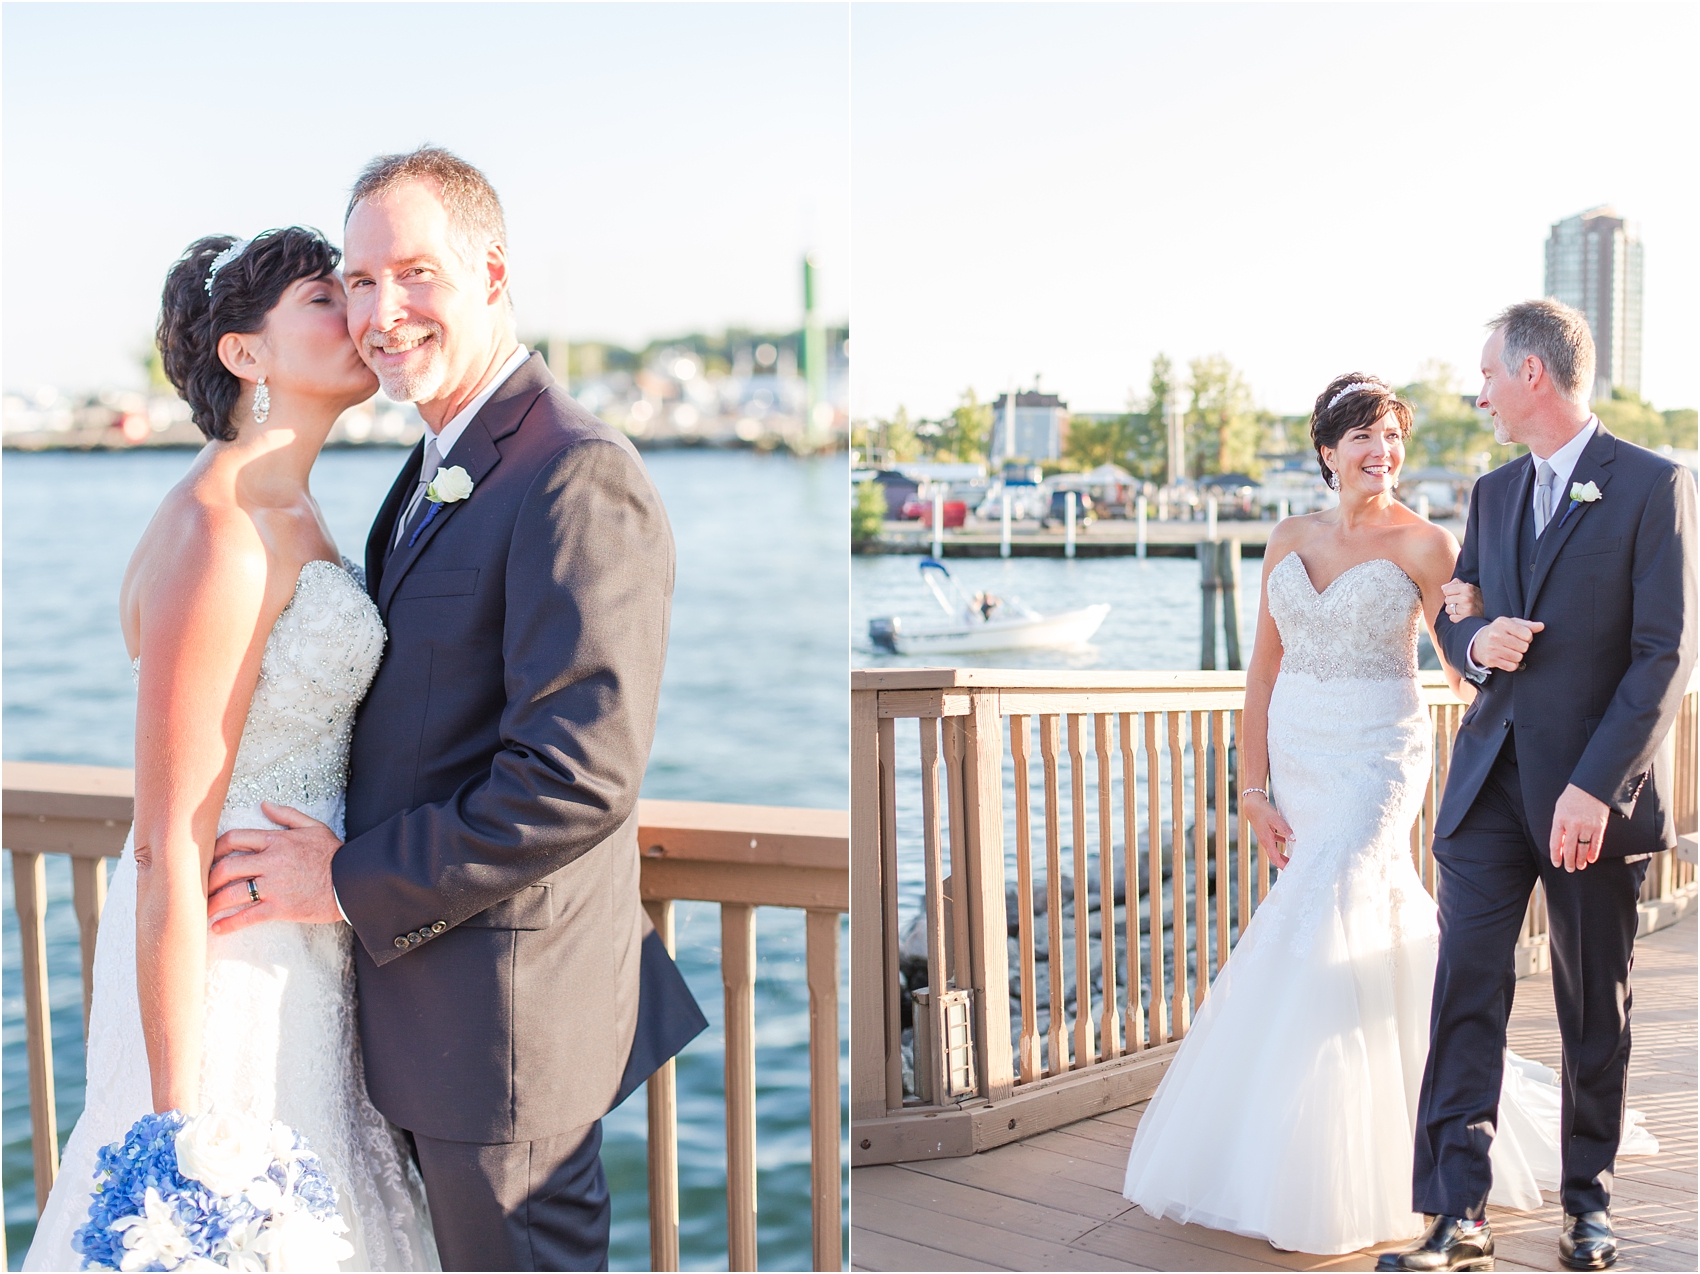 classic-natuical-inspired-wedding-photos-on-infinity-ovation-yacht-in-st-clair-shores-mi-by-courtney-carolyn-photography_0057.jpg